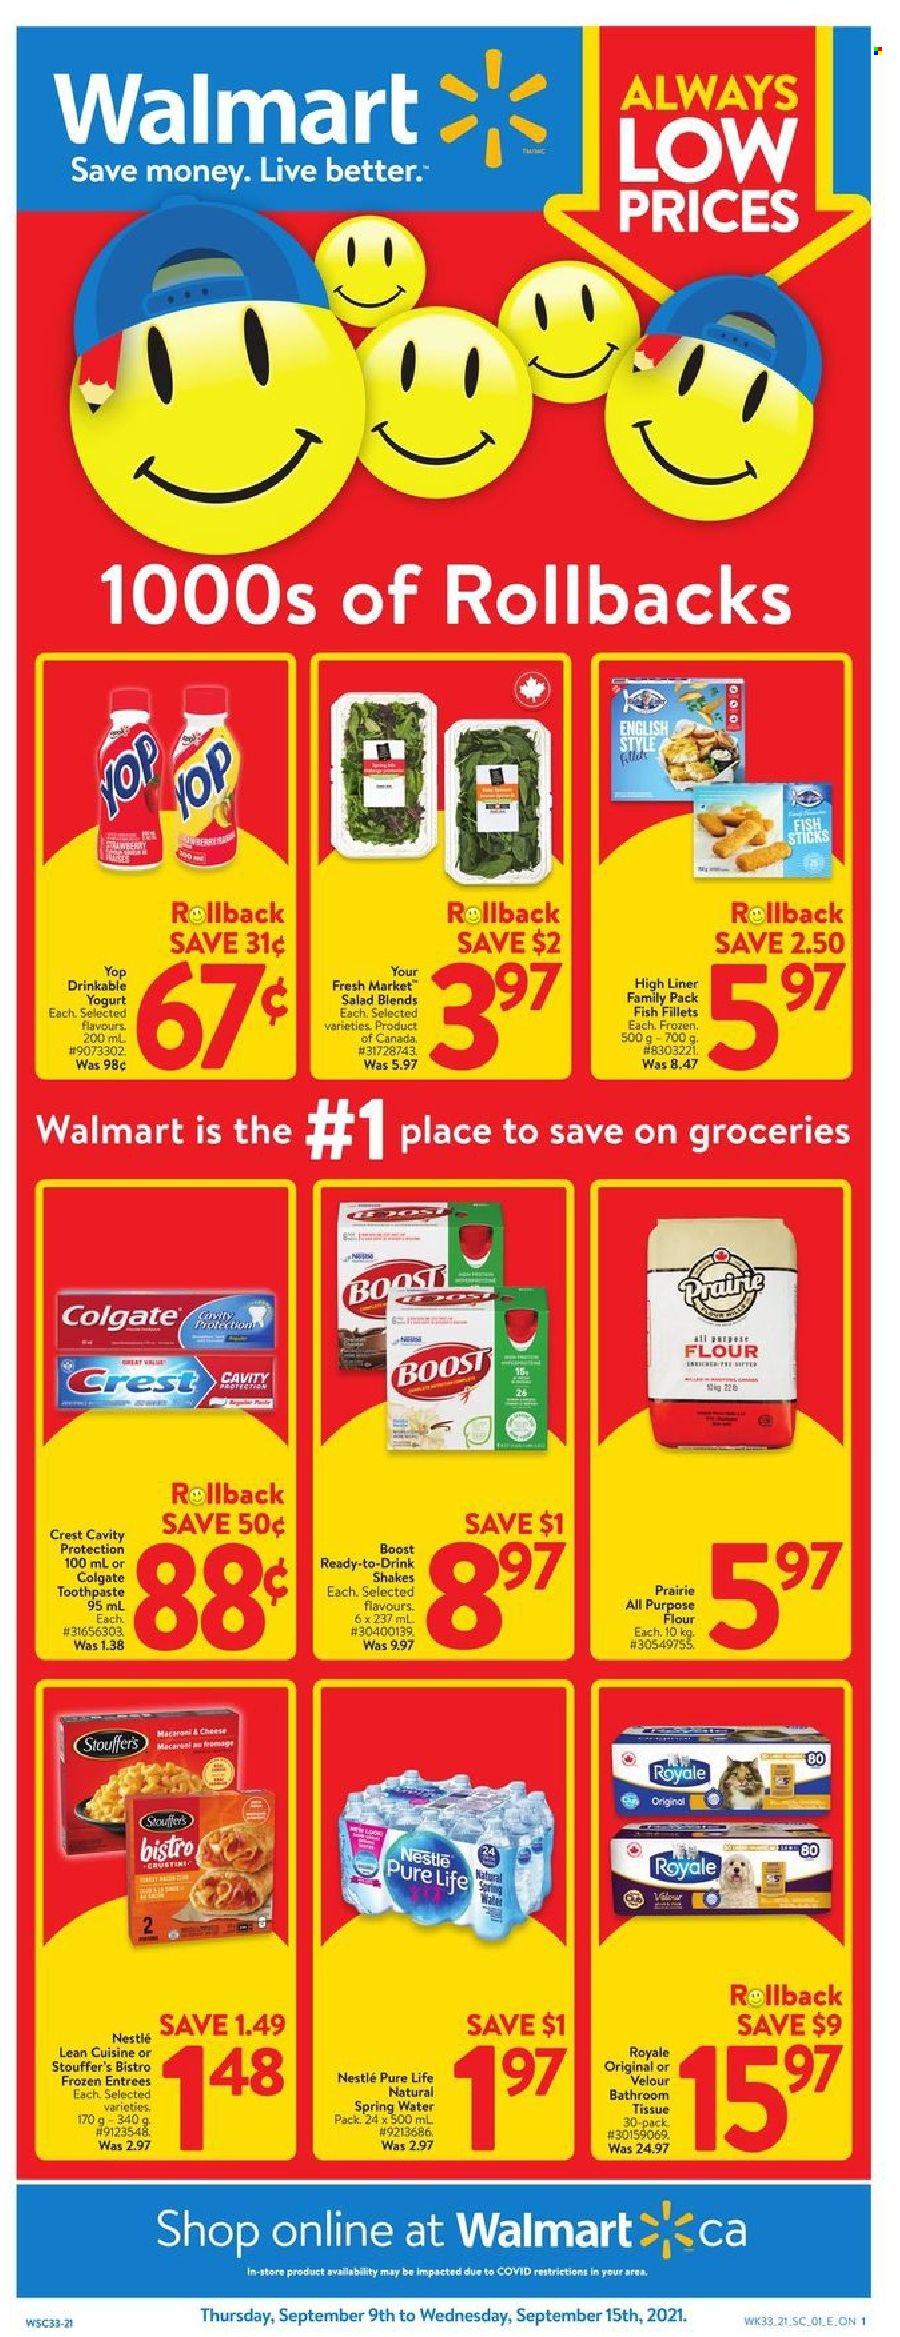 thumbnail - Walmart Flyer - September 09, 2021 - September 15, 2021 - Sales products - salad, fish fillets, fish, fish fingers, fish sticks, Lean Cuisine, cheese, yoghurt, shake, Stouffer's, all purpose flour, flour, spring water, Boost, bath tissue, toothpaste, Crest, Nestlé, Colgate. Page 1.